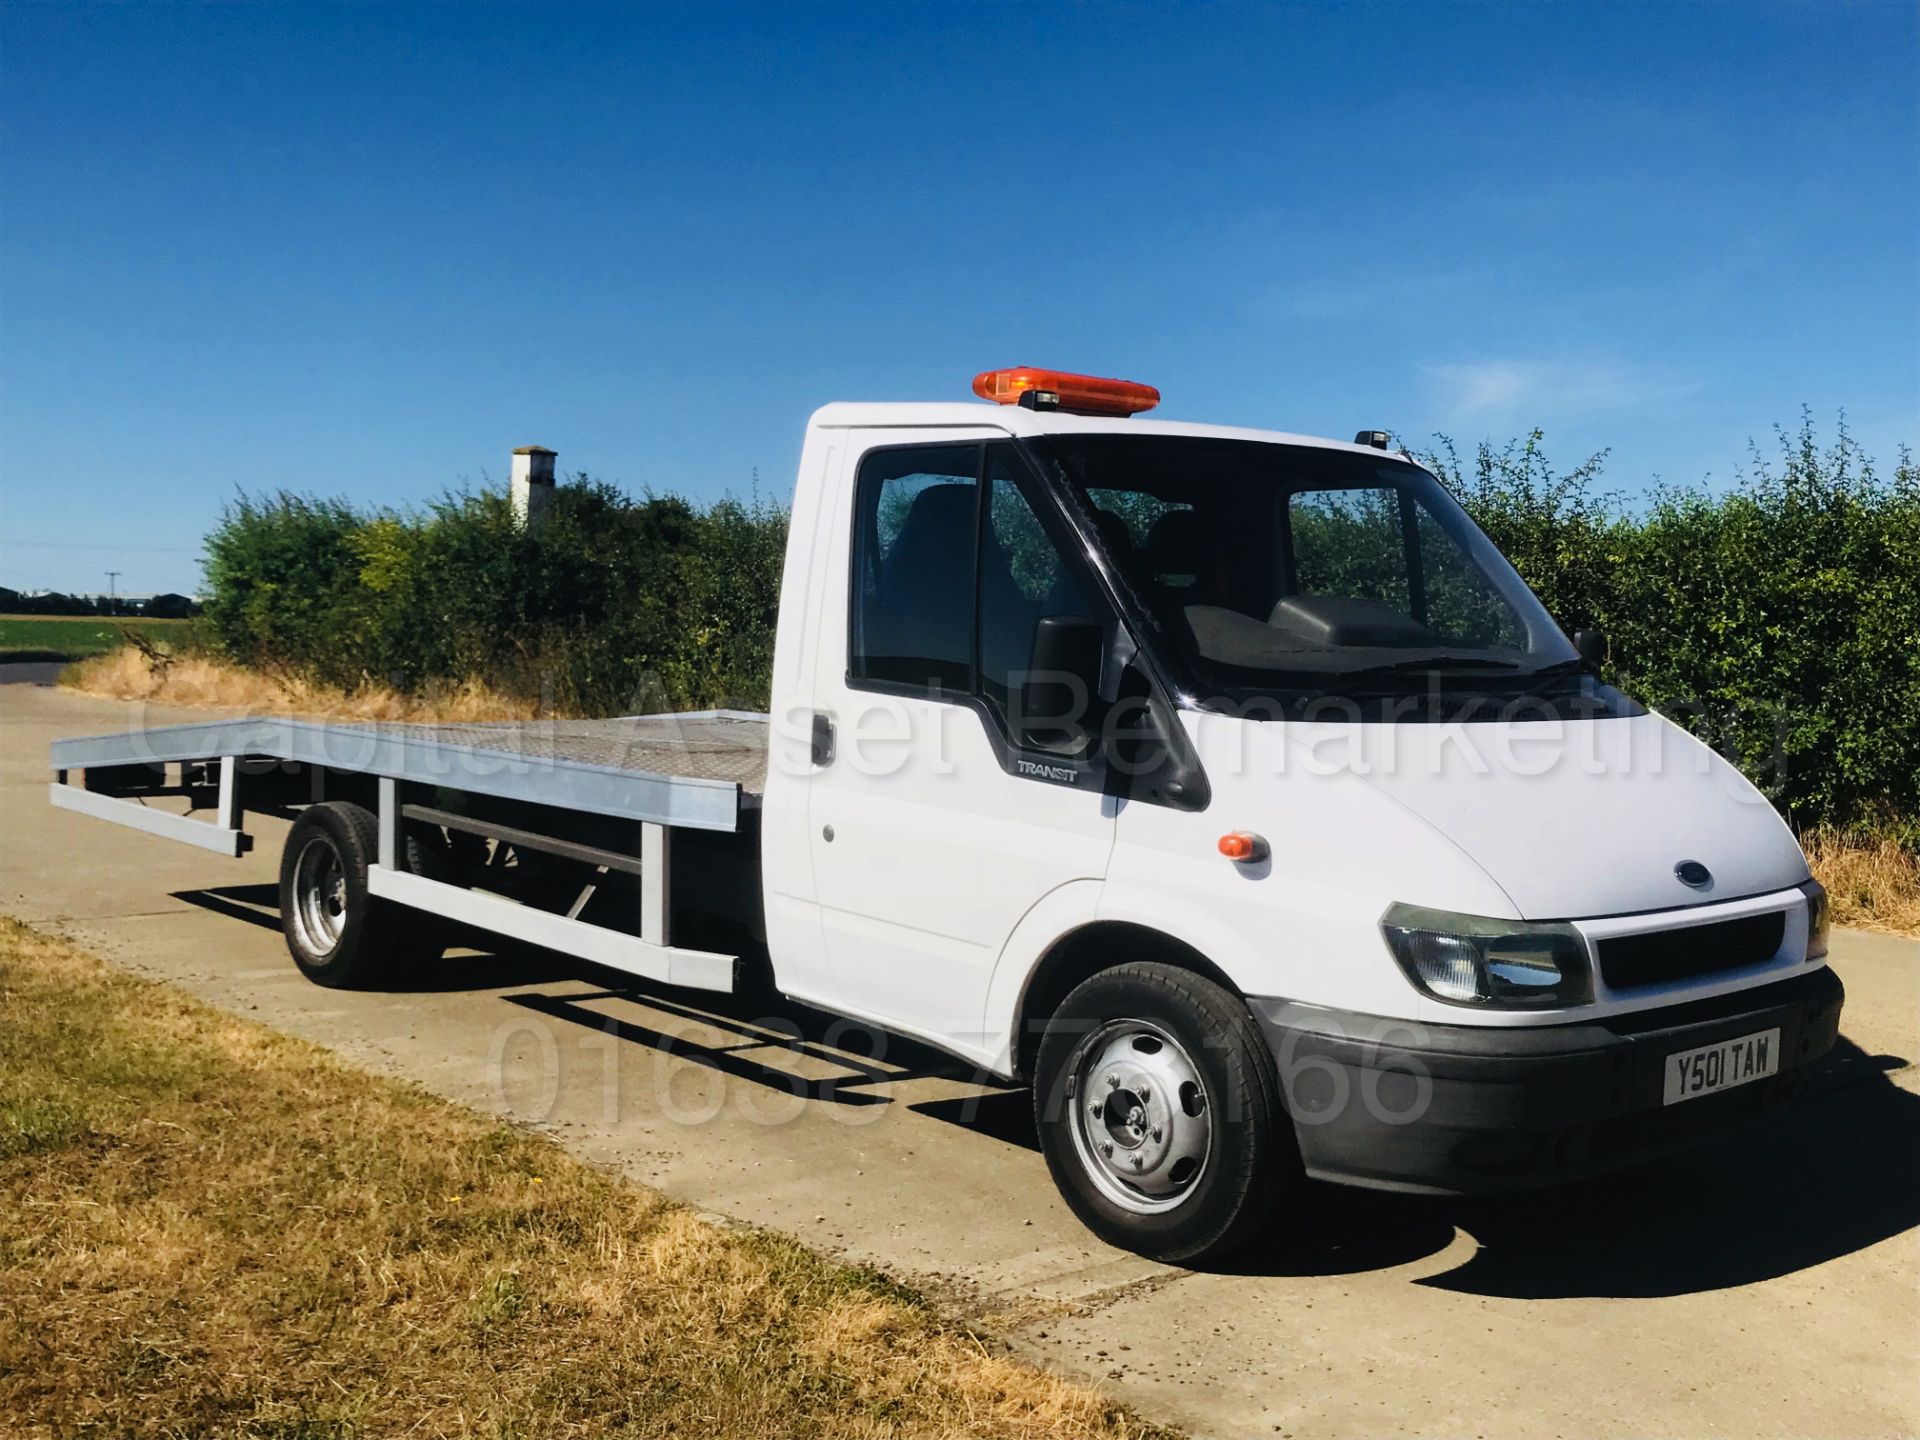 FORD TRANSIT 125 T350 *LWB - RECOVERY TRUCK* (2001 - Y REG) '2.4 TDCI - 5 SPEED' (NO VAT - SAVE 20%)